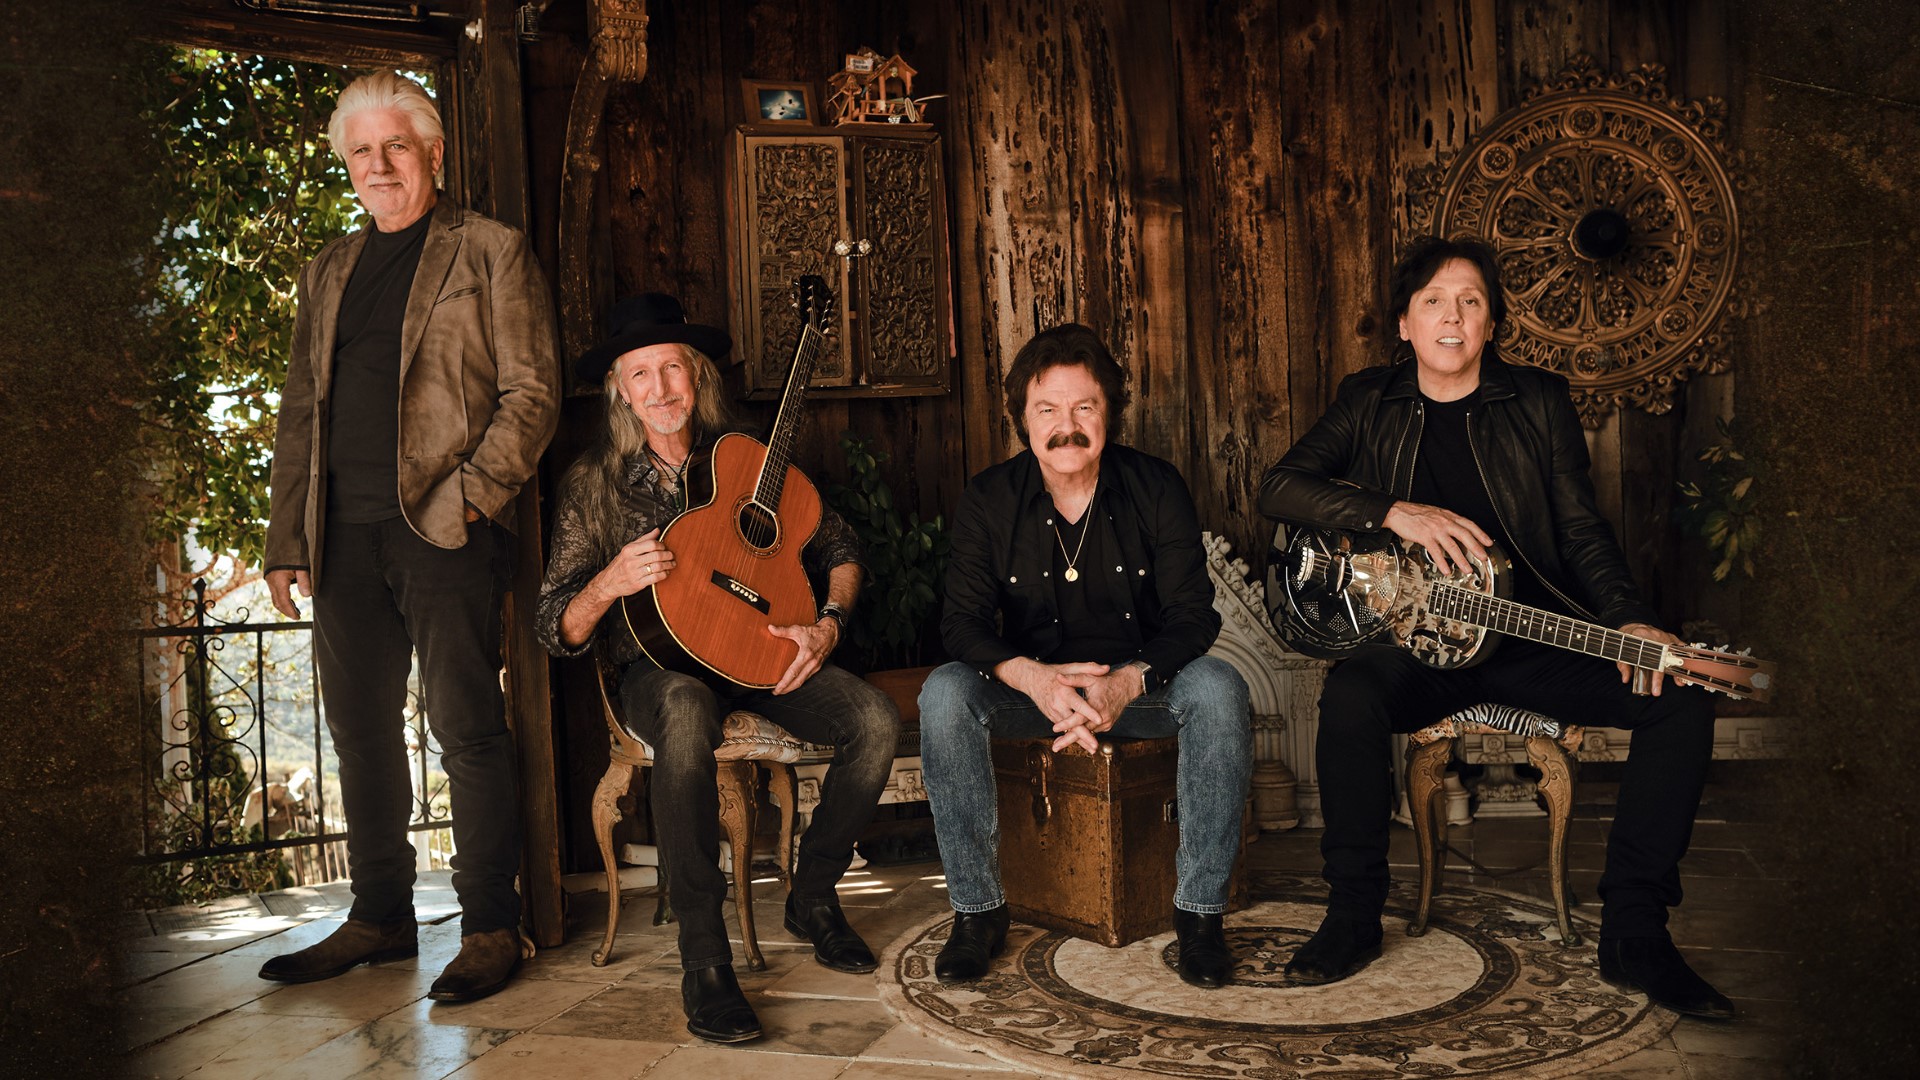 Doobie Brothers tour 2020 Dates, cities and ticket information